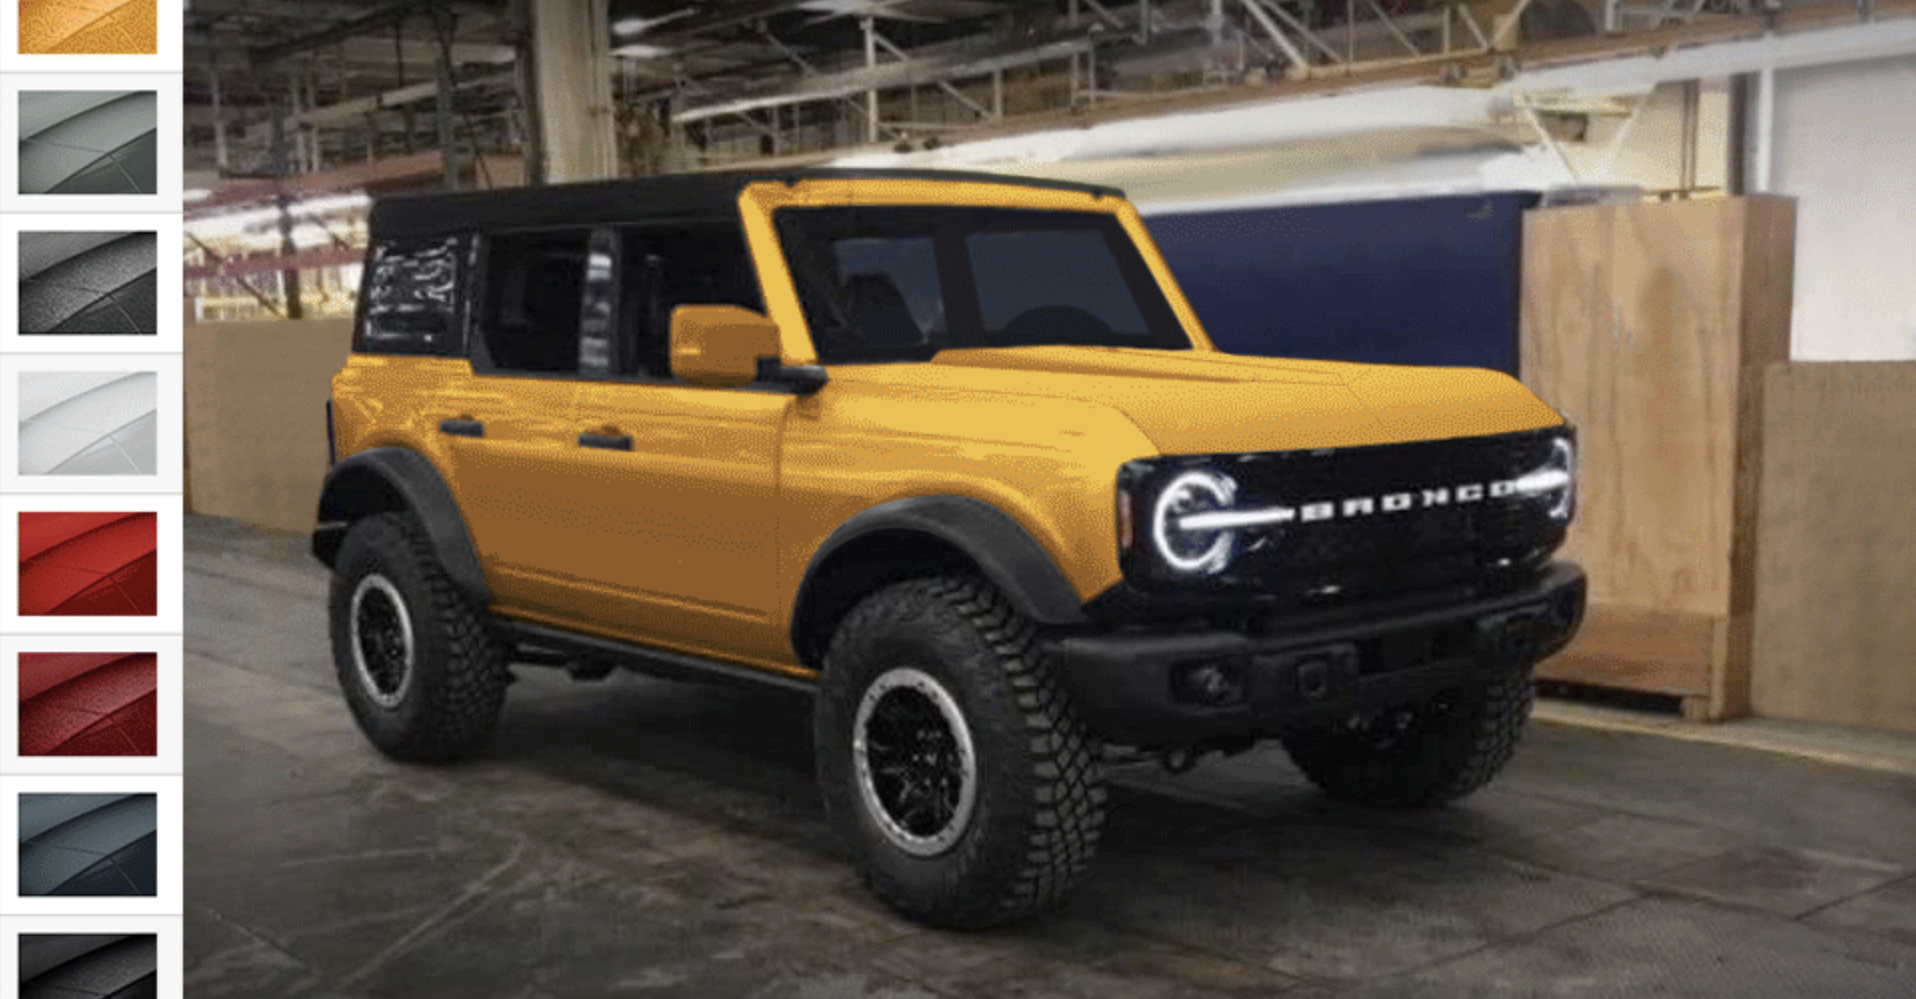 Bronco 4 Door Rendered In 2021 Colors Animated 2021 Ford Bronco Forum 6th Generation Bronco6g Com